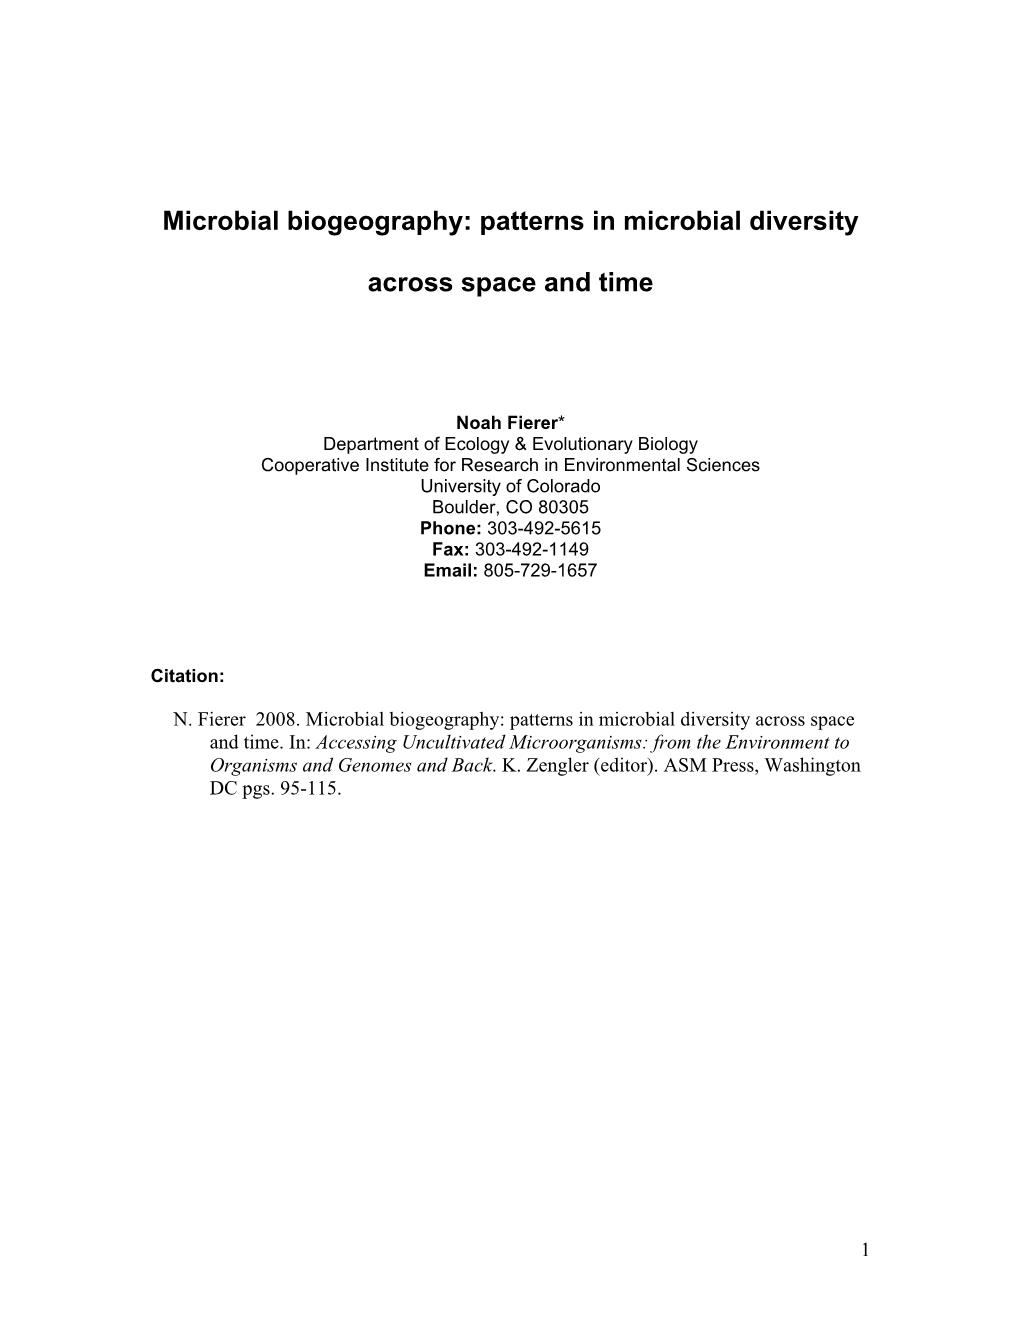 Microbial Biogeography: Patterns in Microbial Diversity